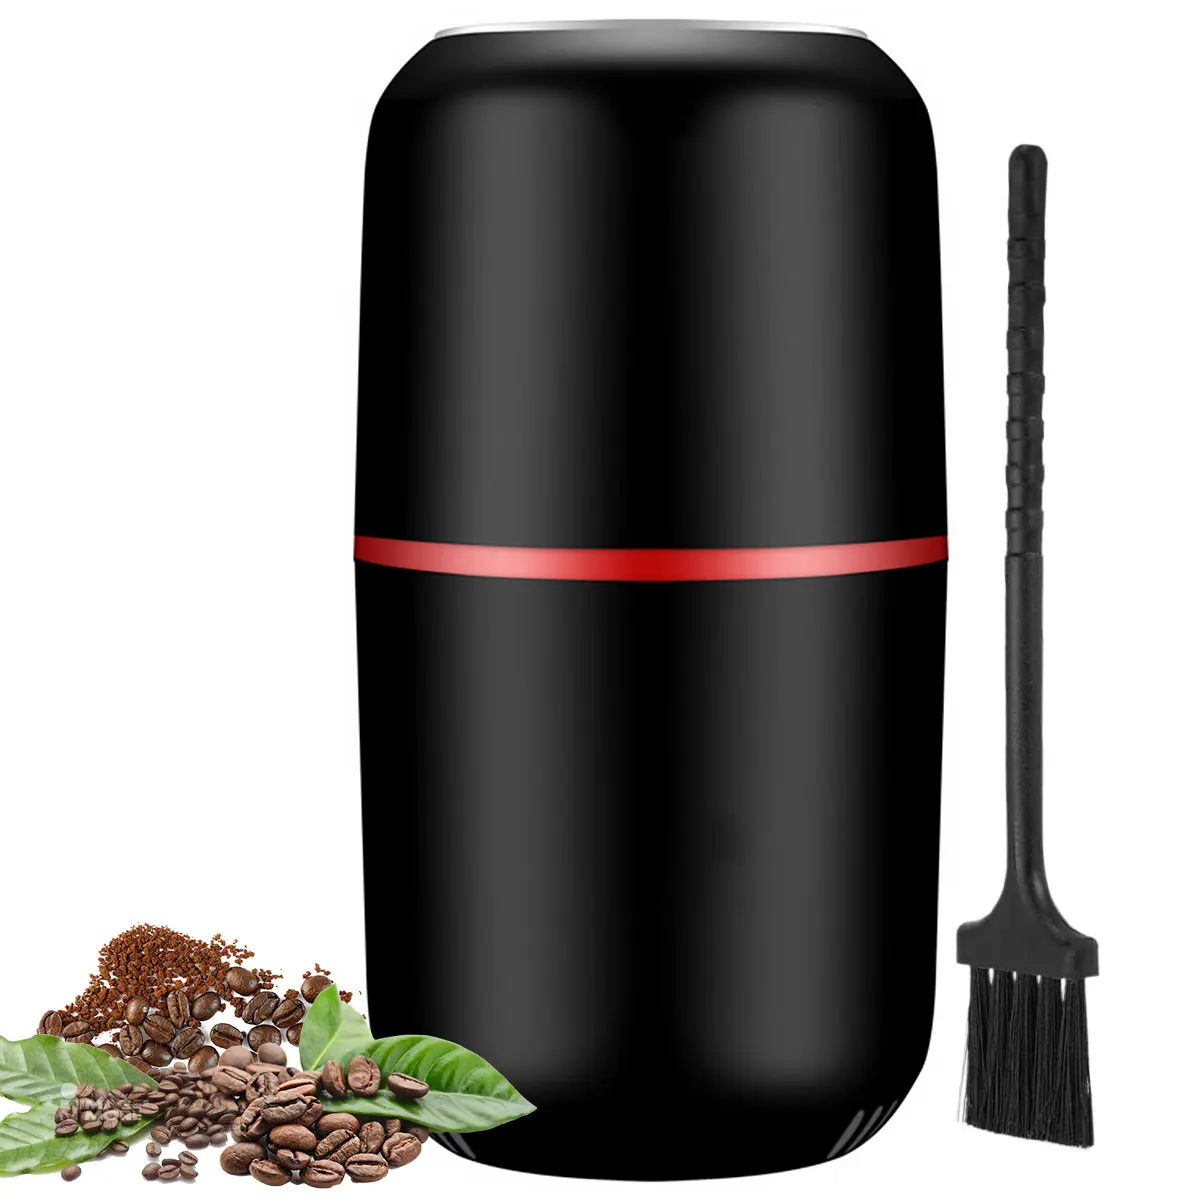 

Electric Coffee Grinder 120g Large Capacity Herb/Spice Grinder with Stainless Steel Blade One-Press Operation 150W Powerful